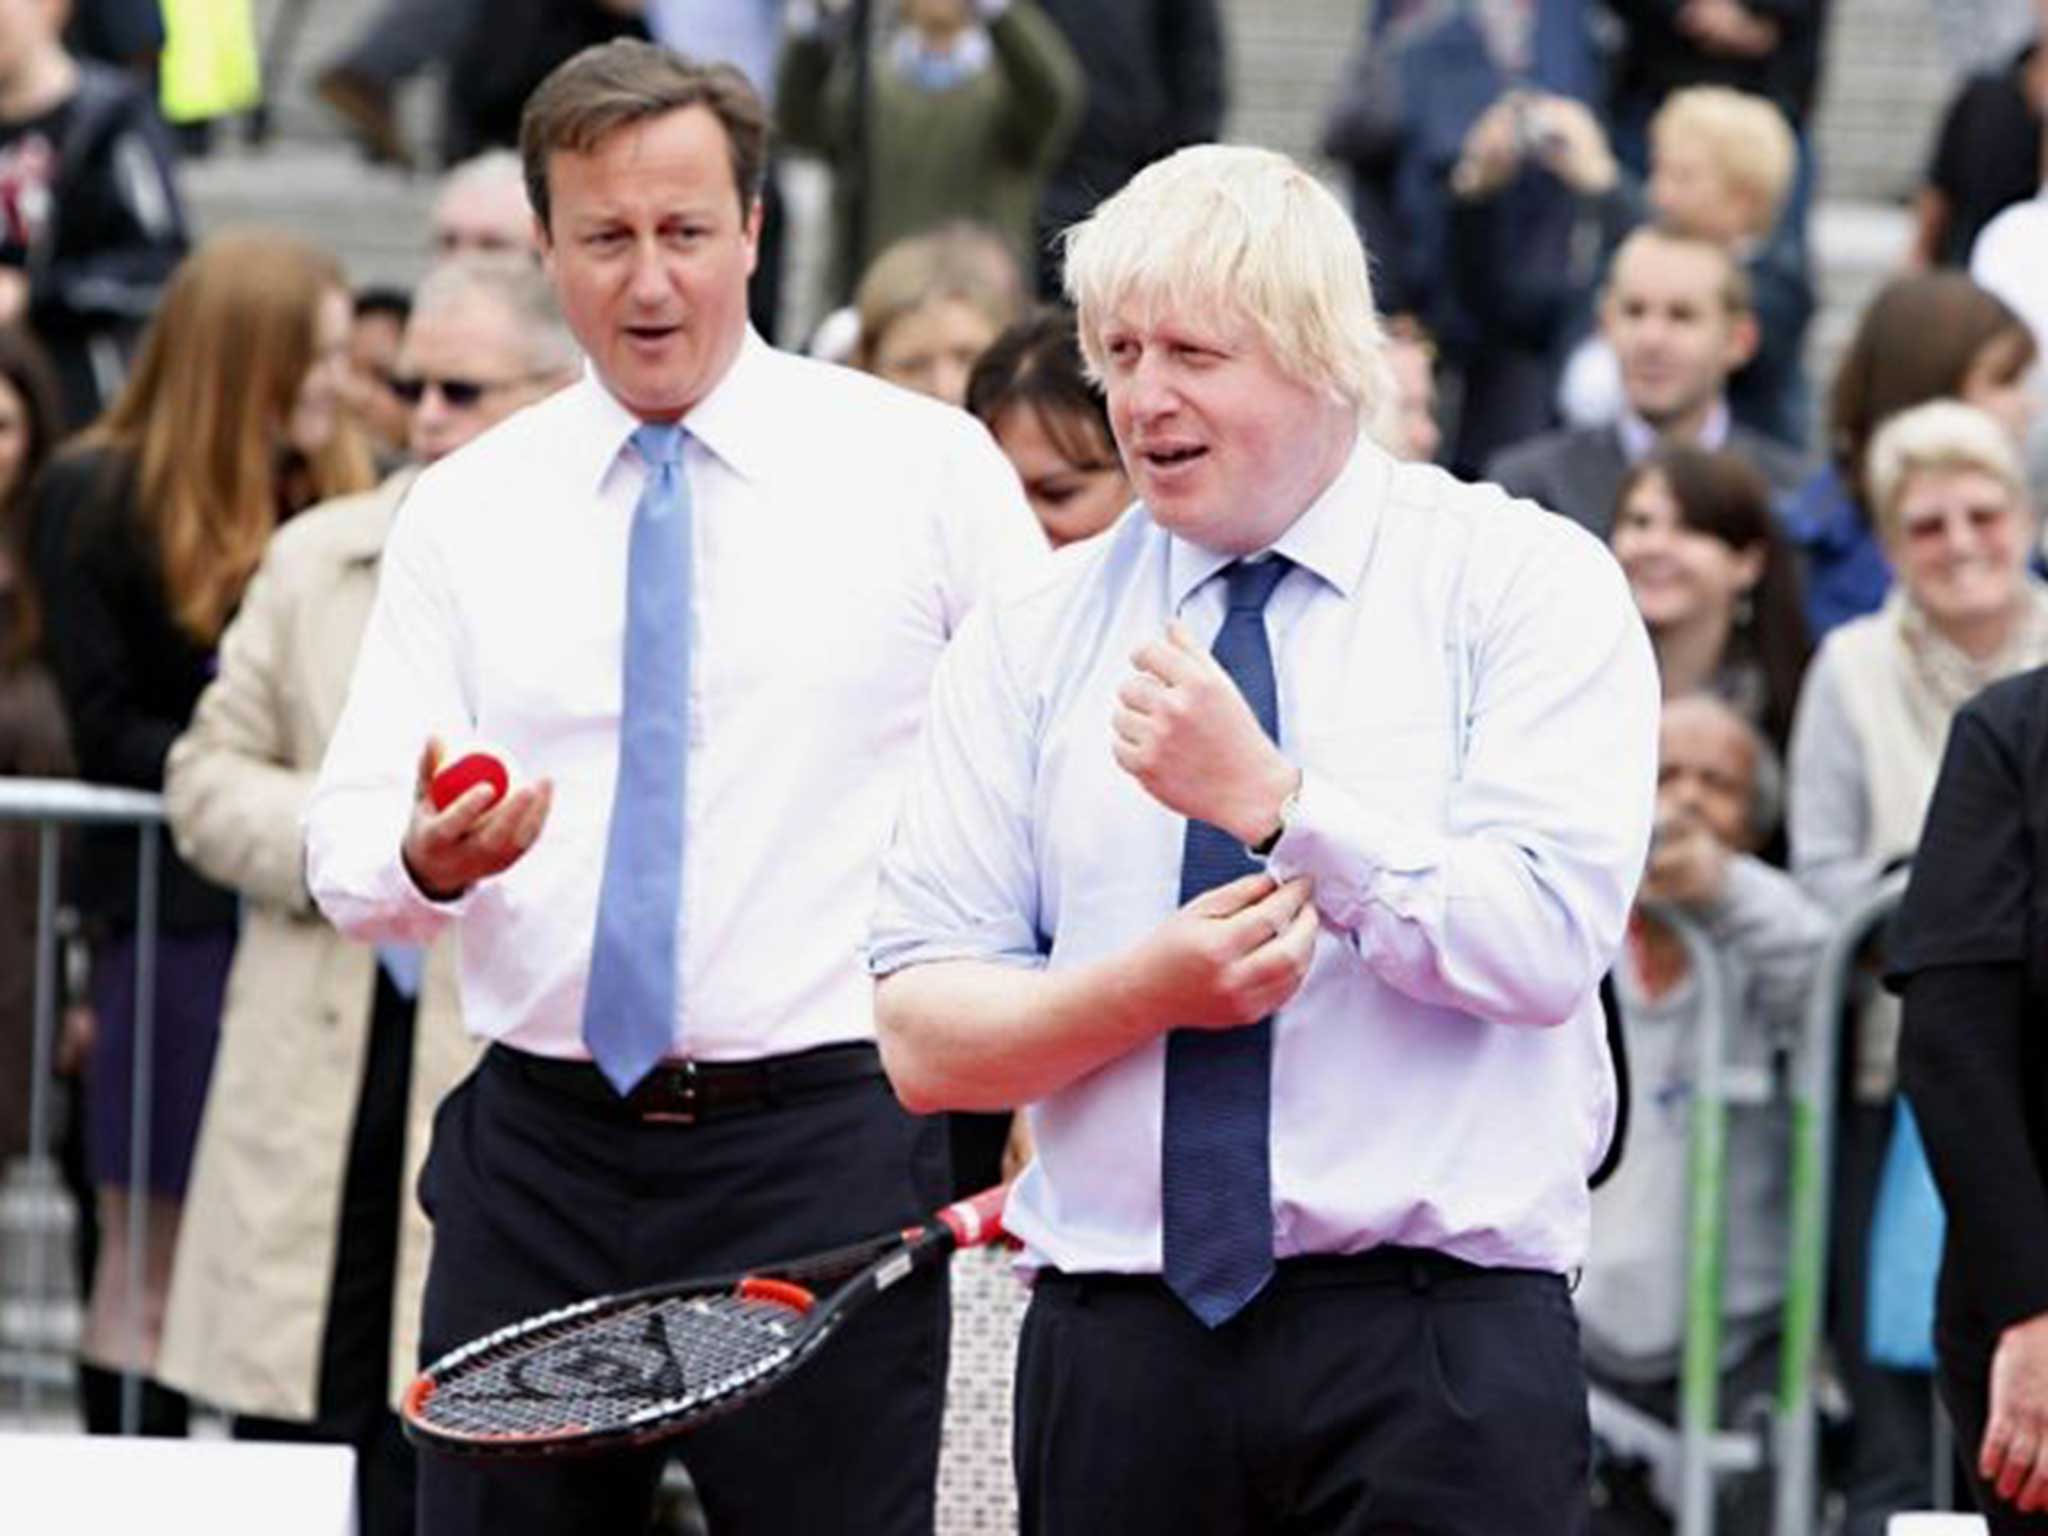 Lubov Chernukhin, a banker and the wife of a former finance minister in Putin’s Russia paid £160,000 for a tennis match with Boris Johnson and David Cameron